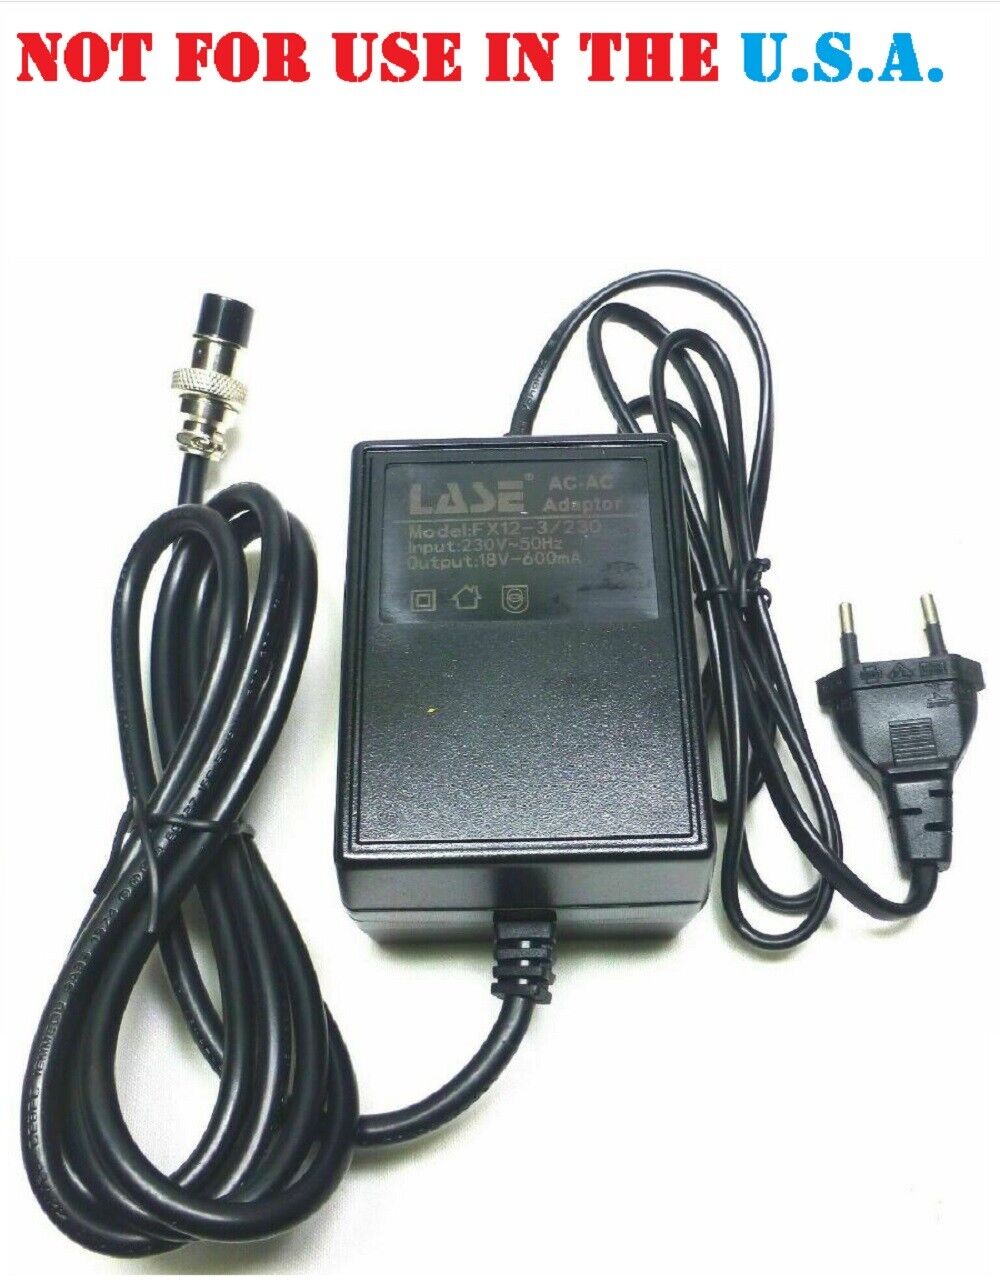 Replacement 220V Power Supply for Yamaha PA30, MG16, MG166CX/206, F4/F7 6FX Y6M6